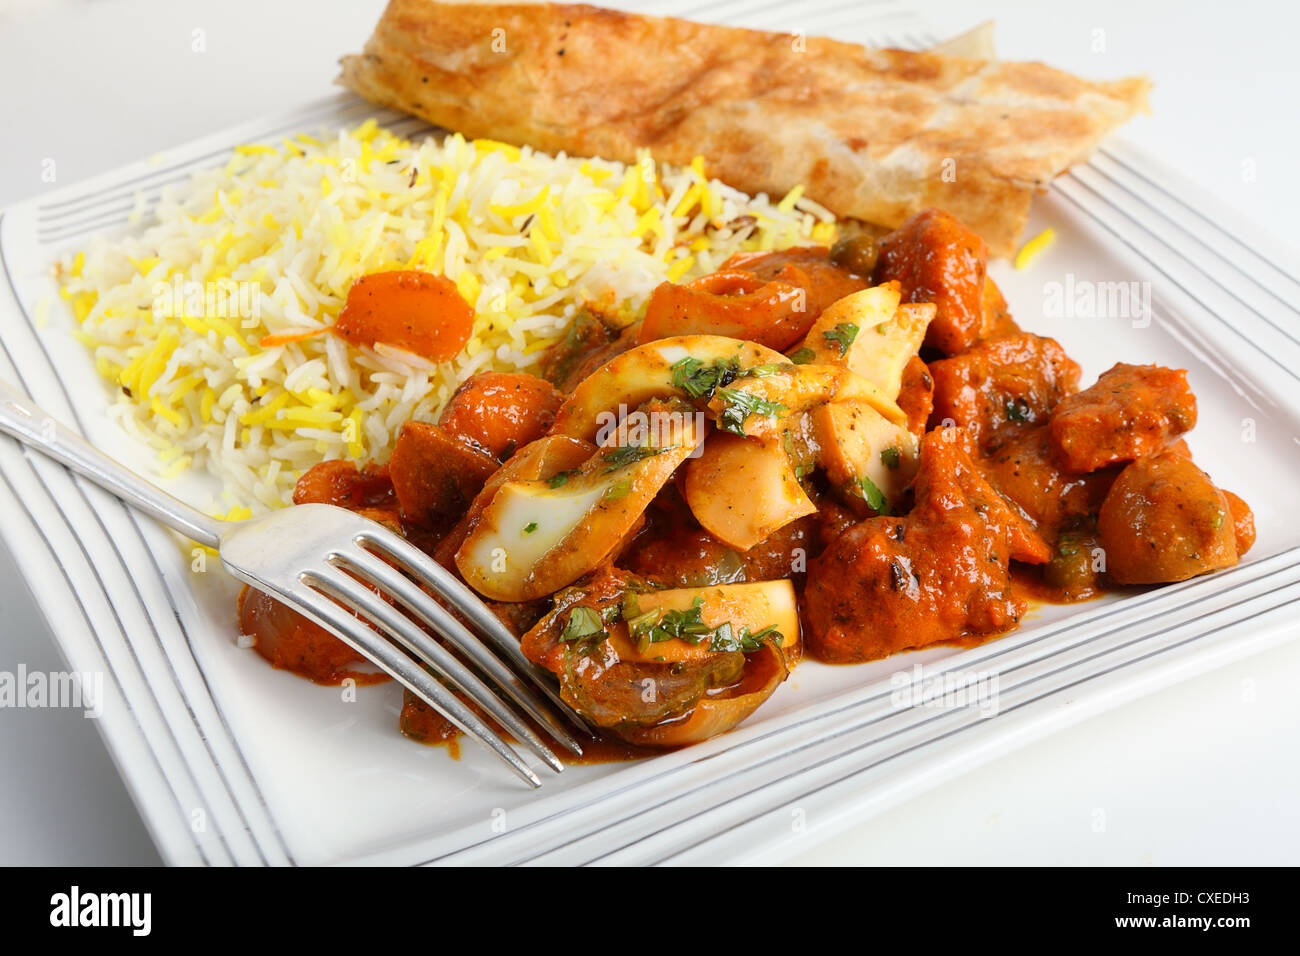 Chicken jalfrezi curry on a plate with pilau rice and a piece of naan bread. Stock Photo